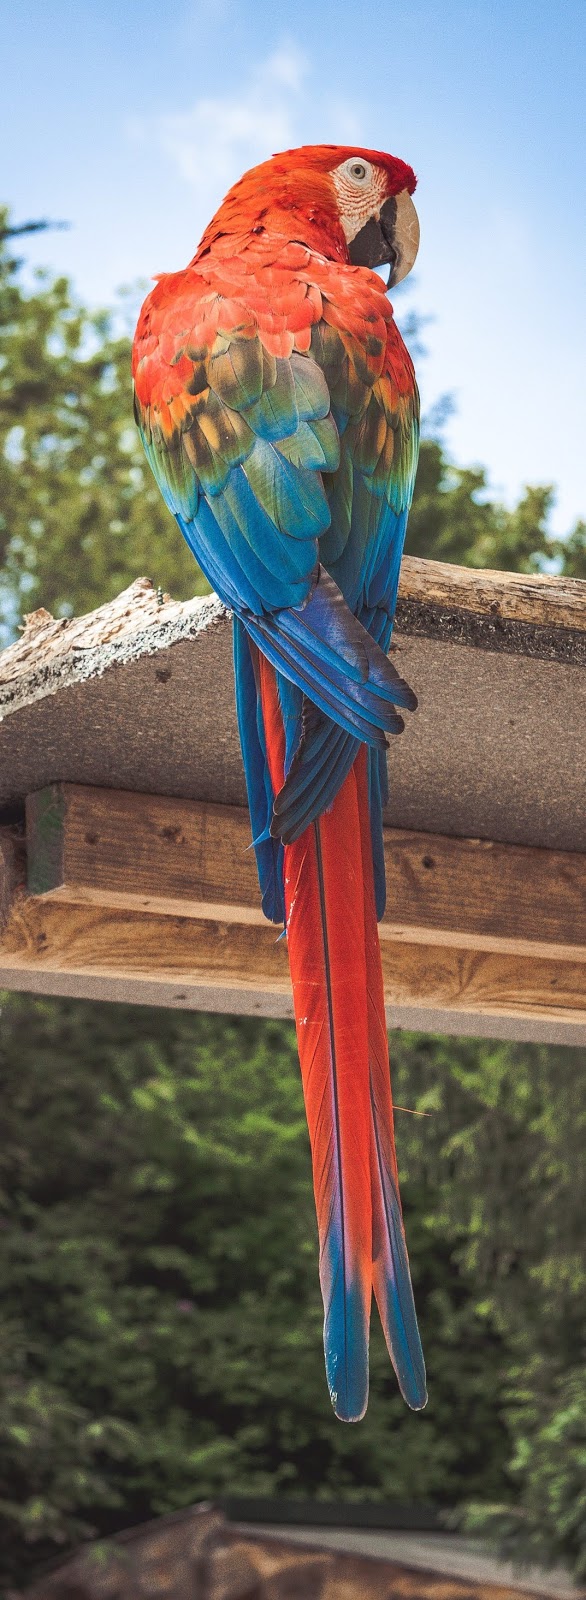 Picture of a beautiful macaw.